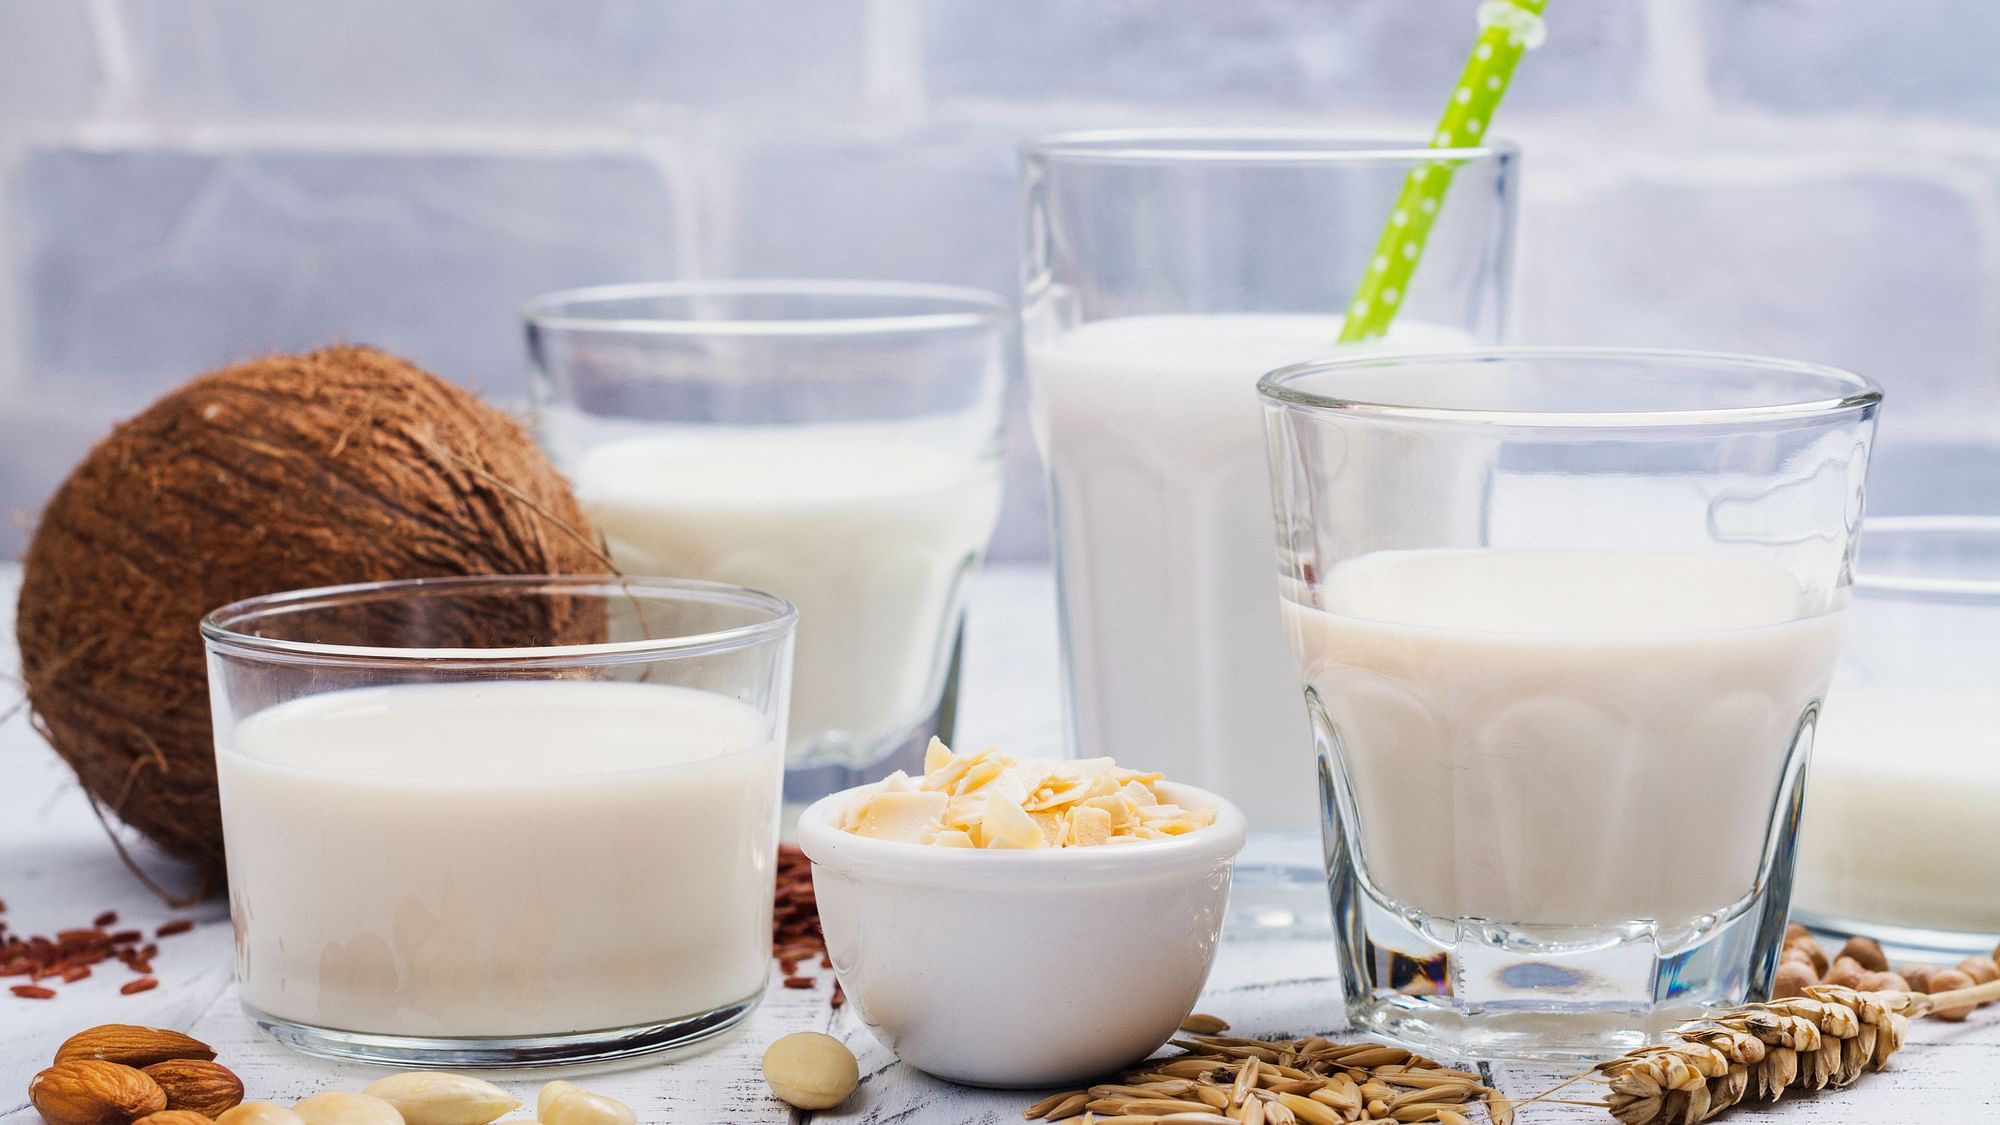 Are you lactose intolerant, vegan or just don’t like milk? Here are some plant based milk options for you.